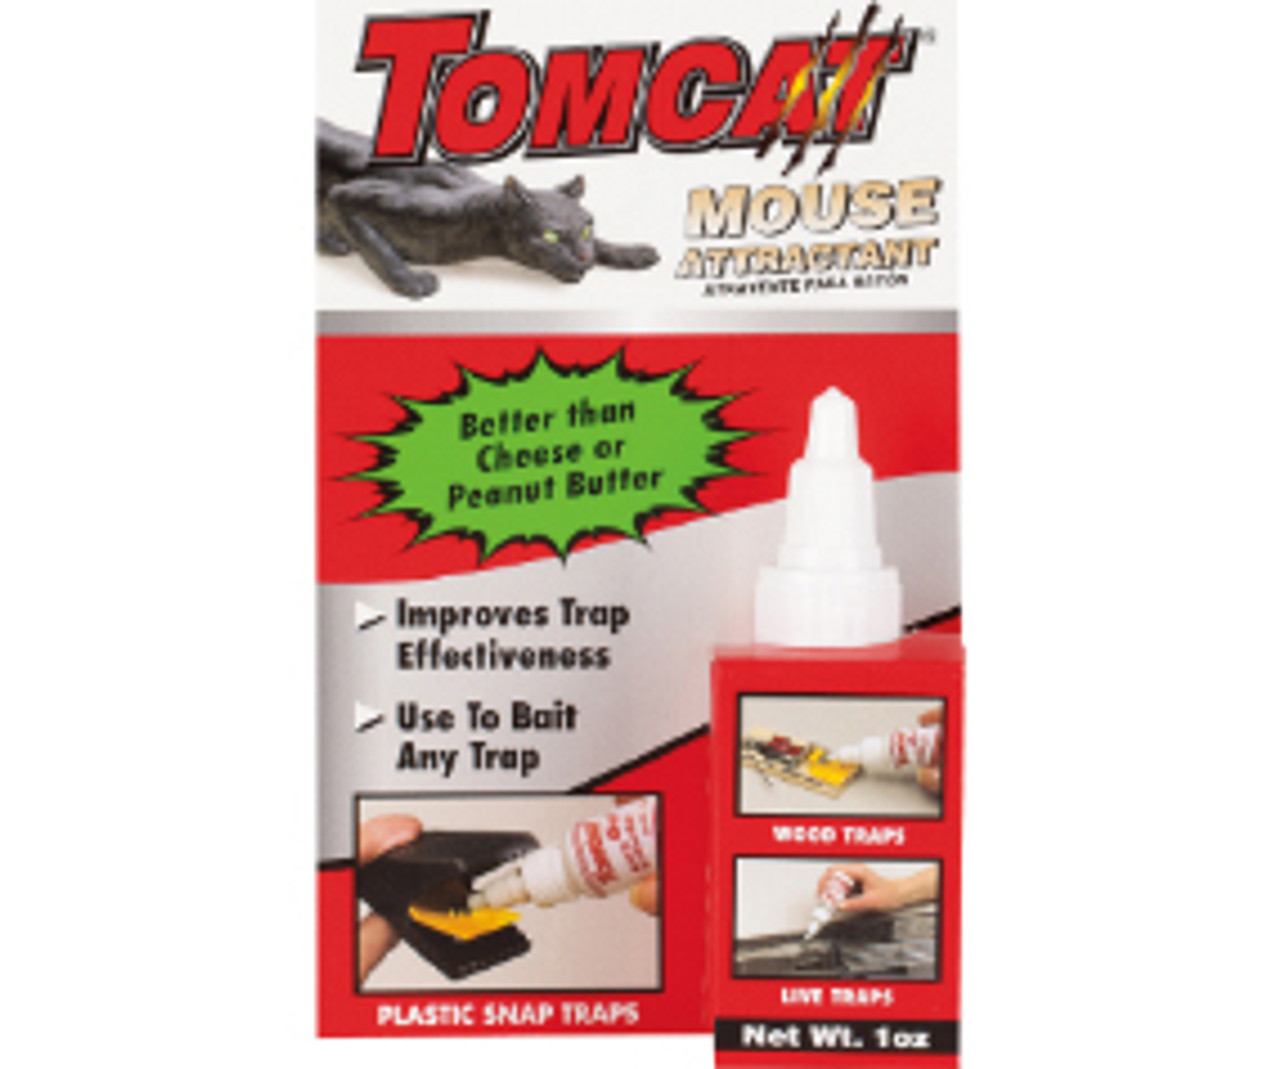 TOMCAT Mouse Attractant Gel - Maxwell's of Chelmsford